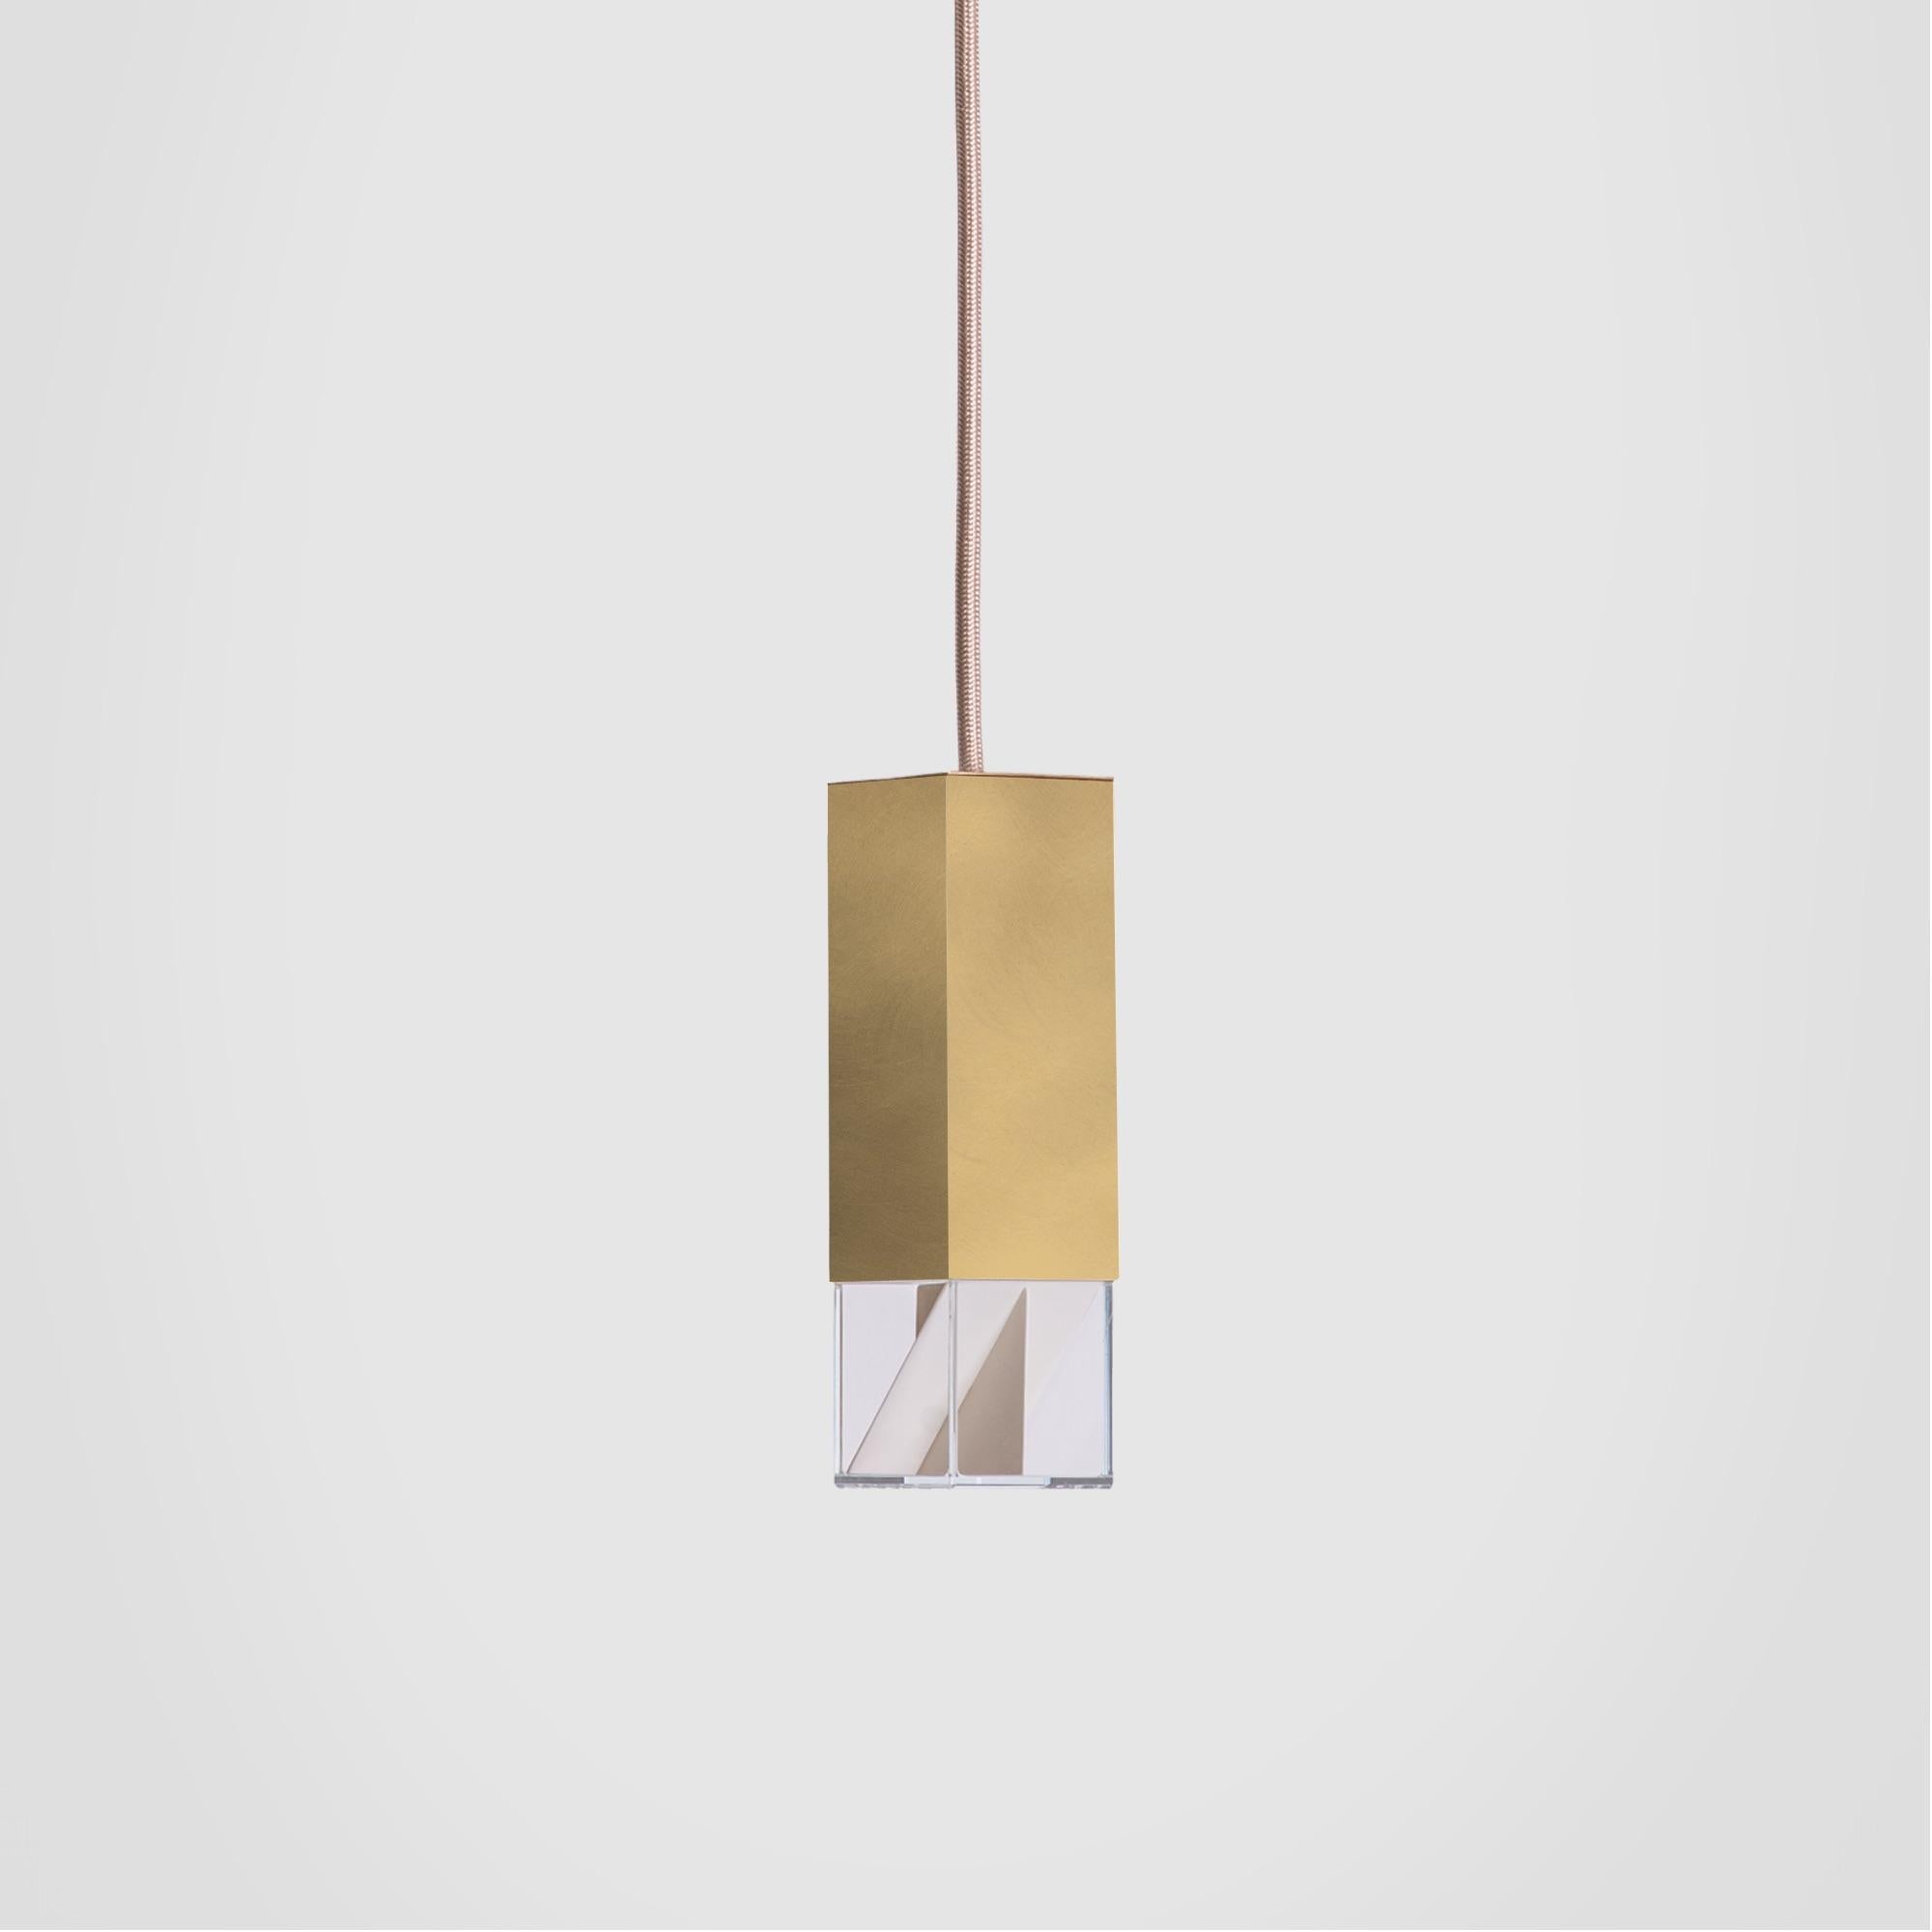 About
Contemporary Brushed Brass Single Pendant Lamp by Formaminima

Lamp/One Brass Revamp 02 Edition
Design by Formaminima
Single pendant
Materials:
Body lamp handcrafted in burnished brushed brass / crystal glass diffuser hosting Limoges